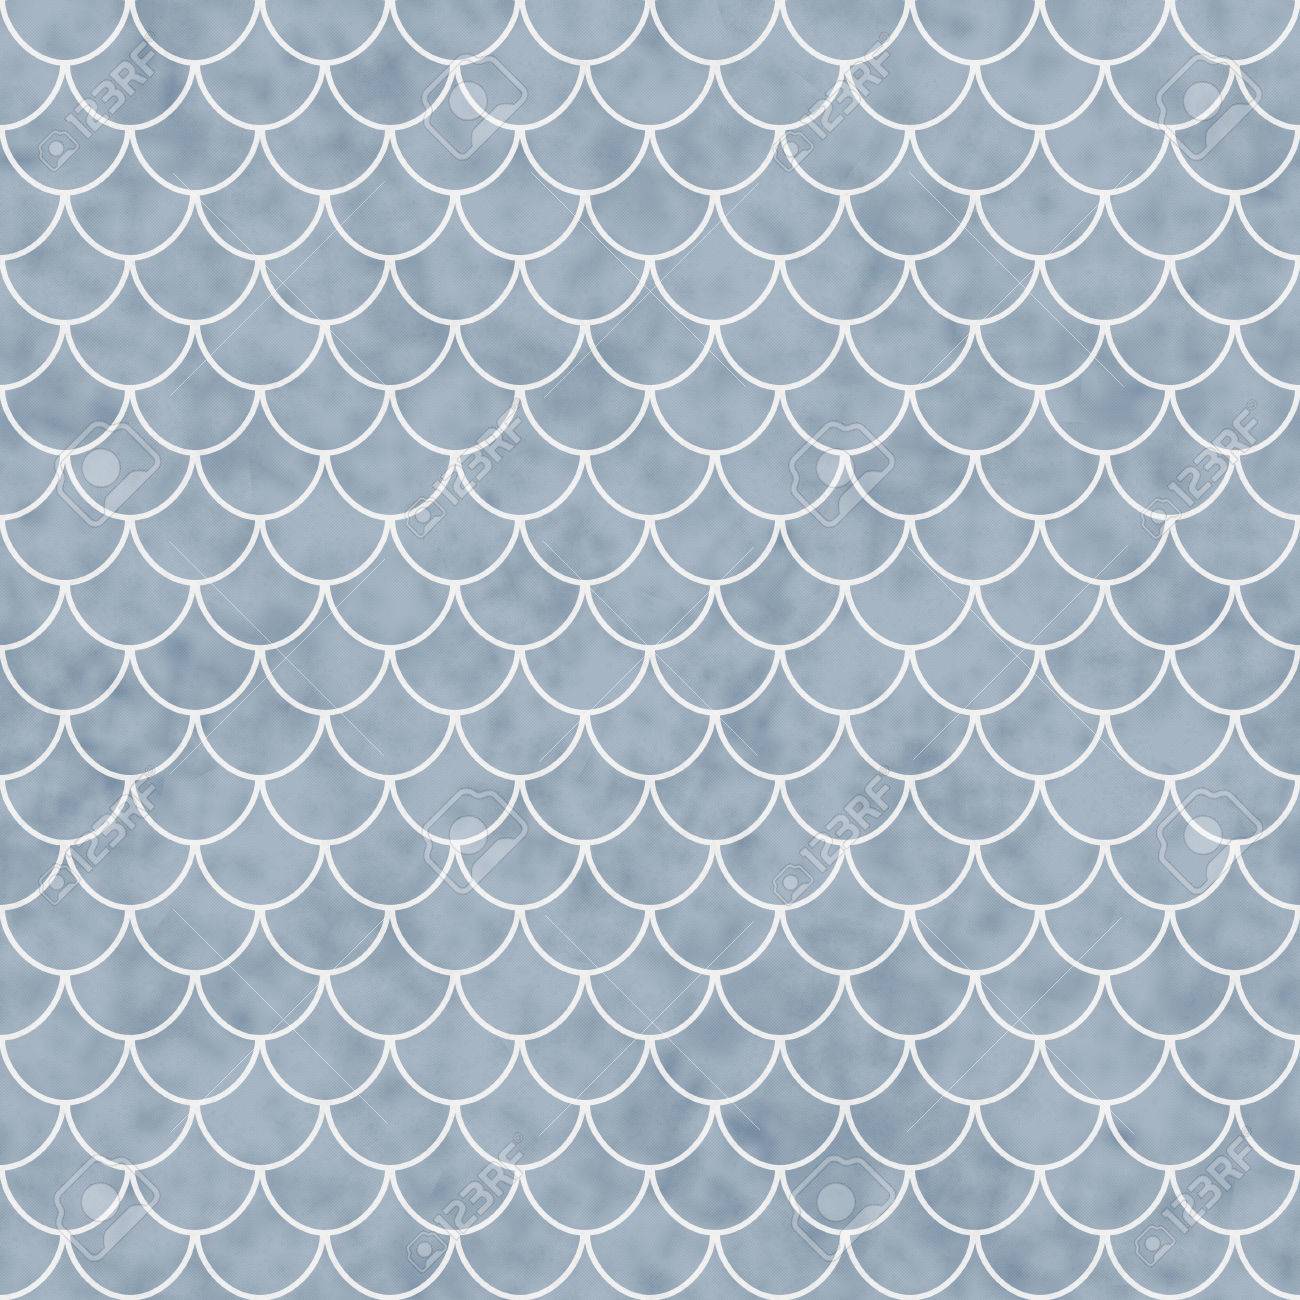 Blue And White Shell Tiles Pattern Repeat Background That Is